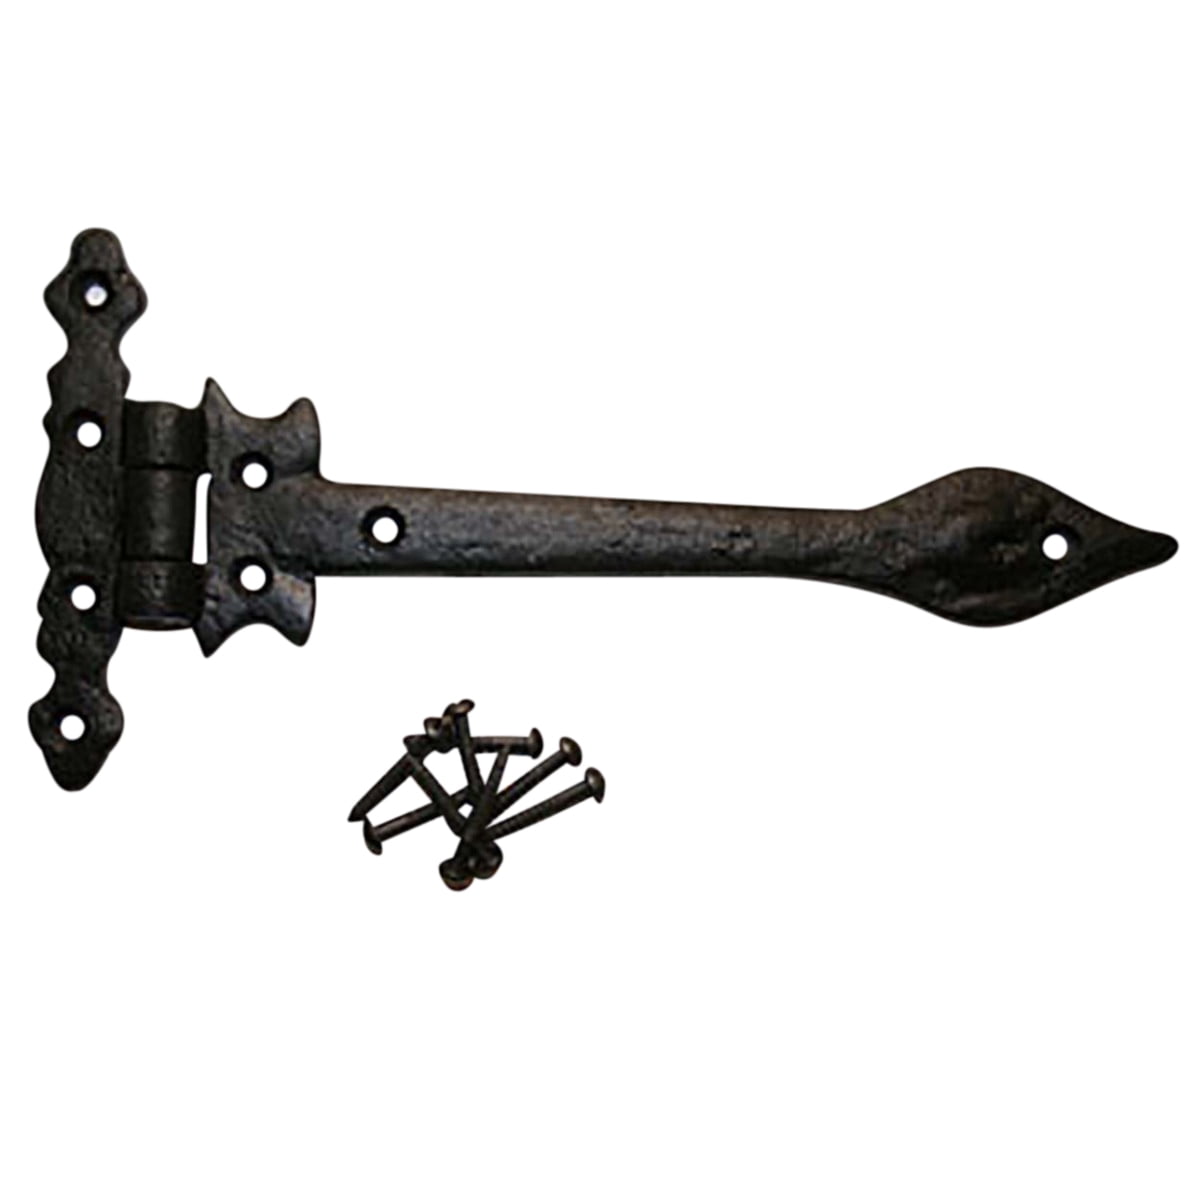 Black Wrought Iron Strap Hinge Doors or Gates Spear Tip 11-3/4in Wide ...